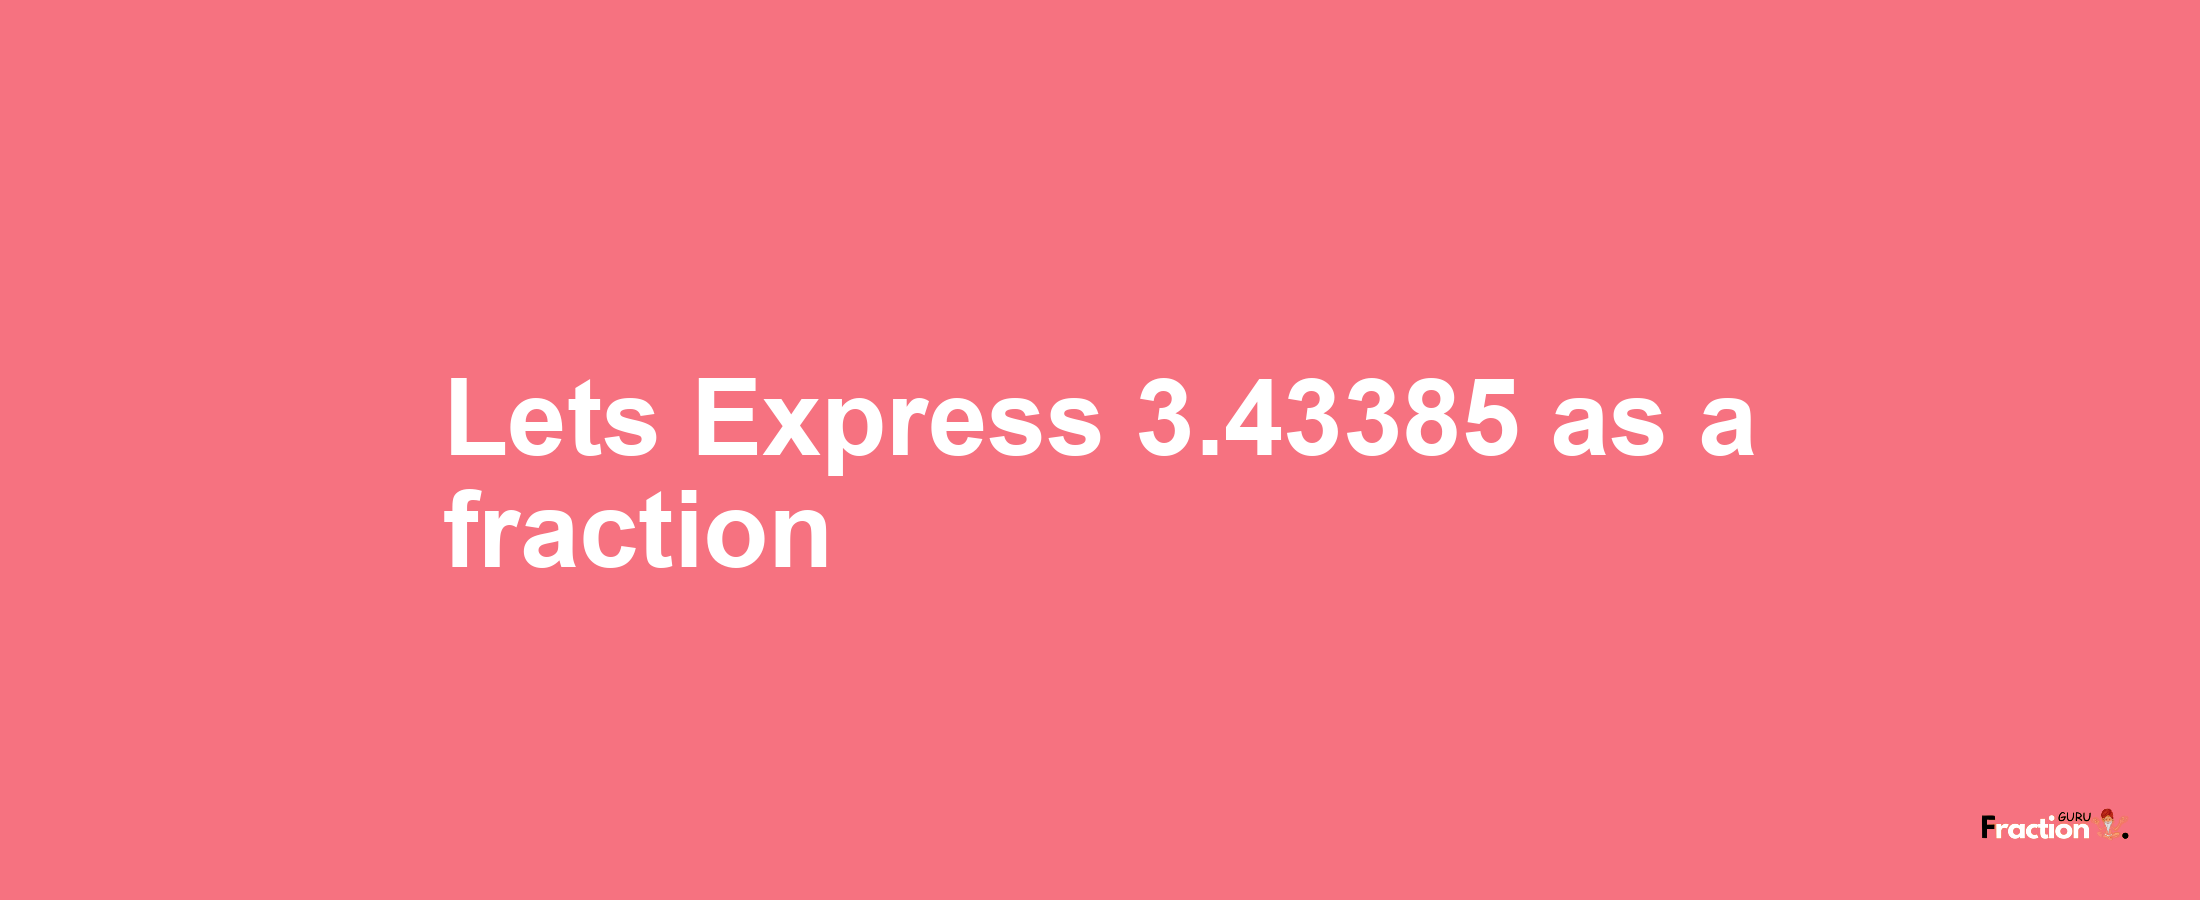 Lets Express 3.43385 as afraction